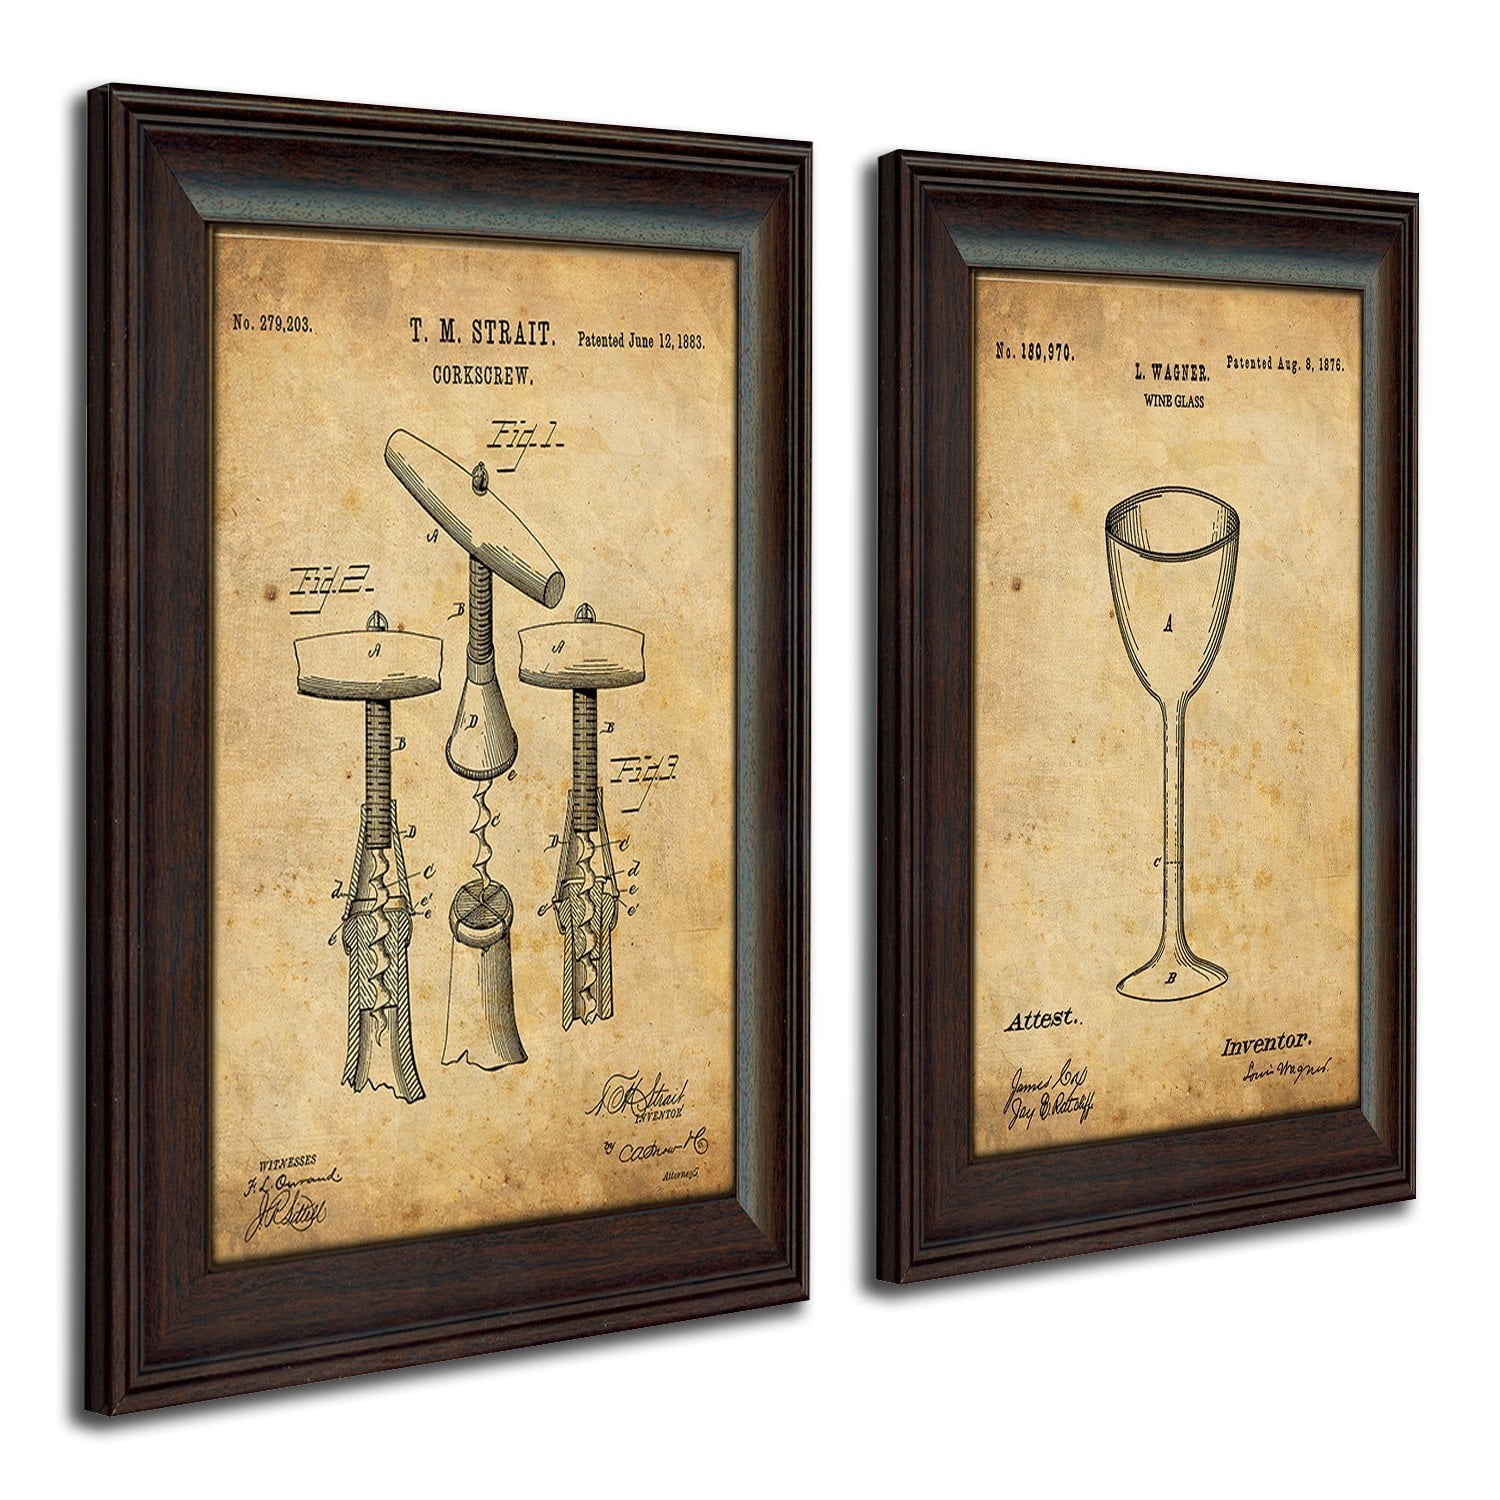 Framed wine art using the original patent art for a cork screw and wine glass - Personal-Prints